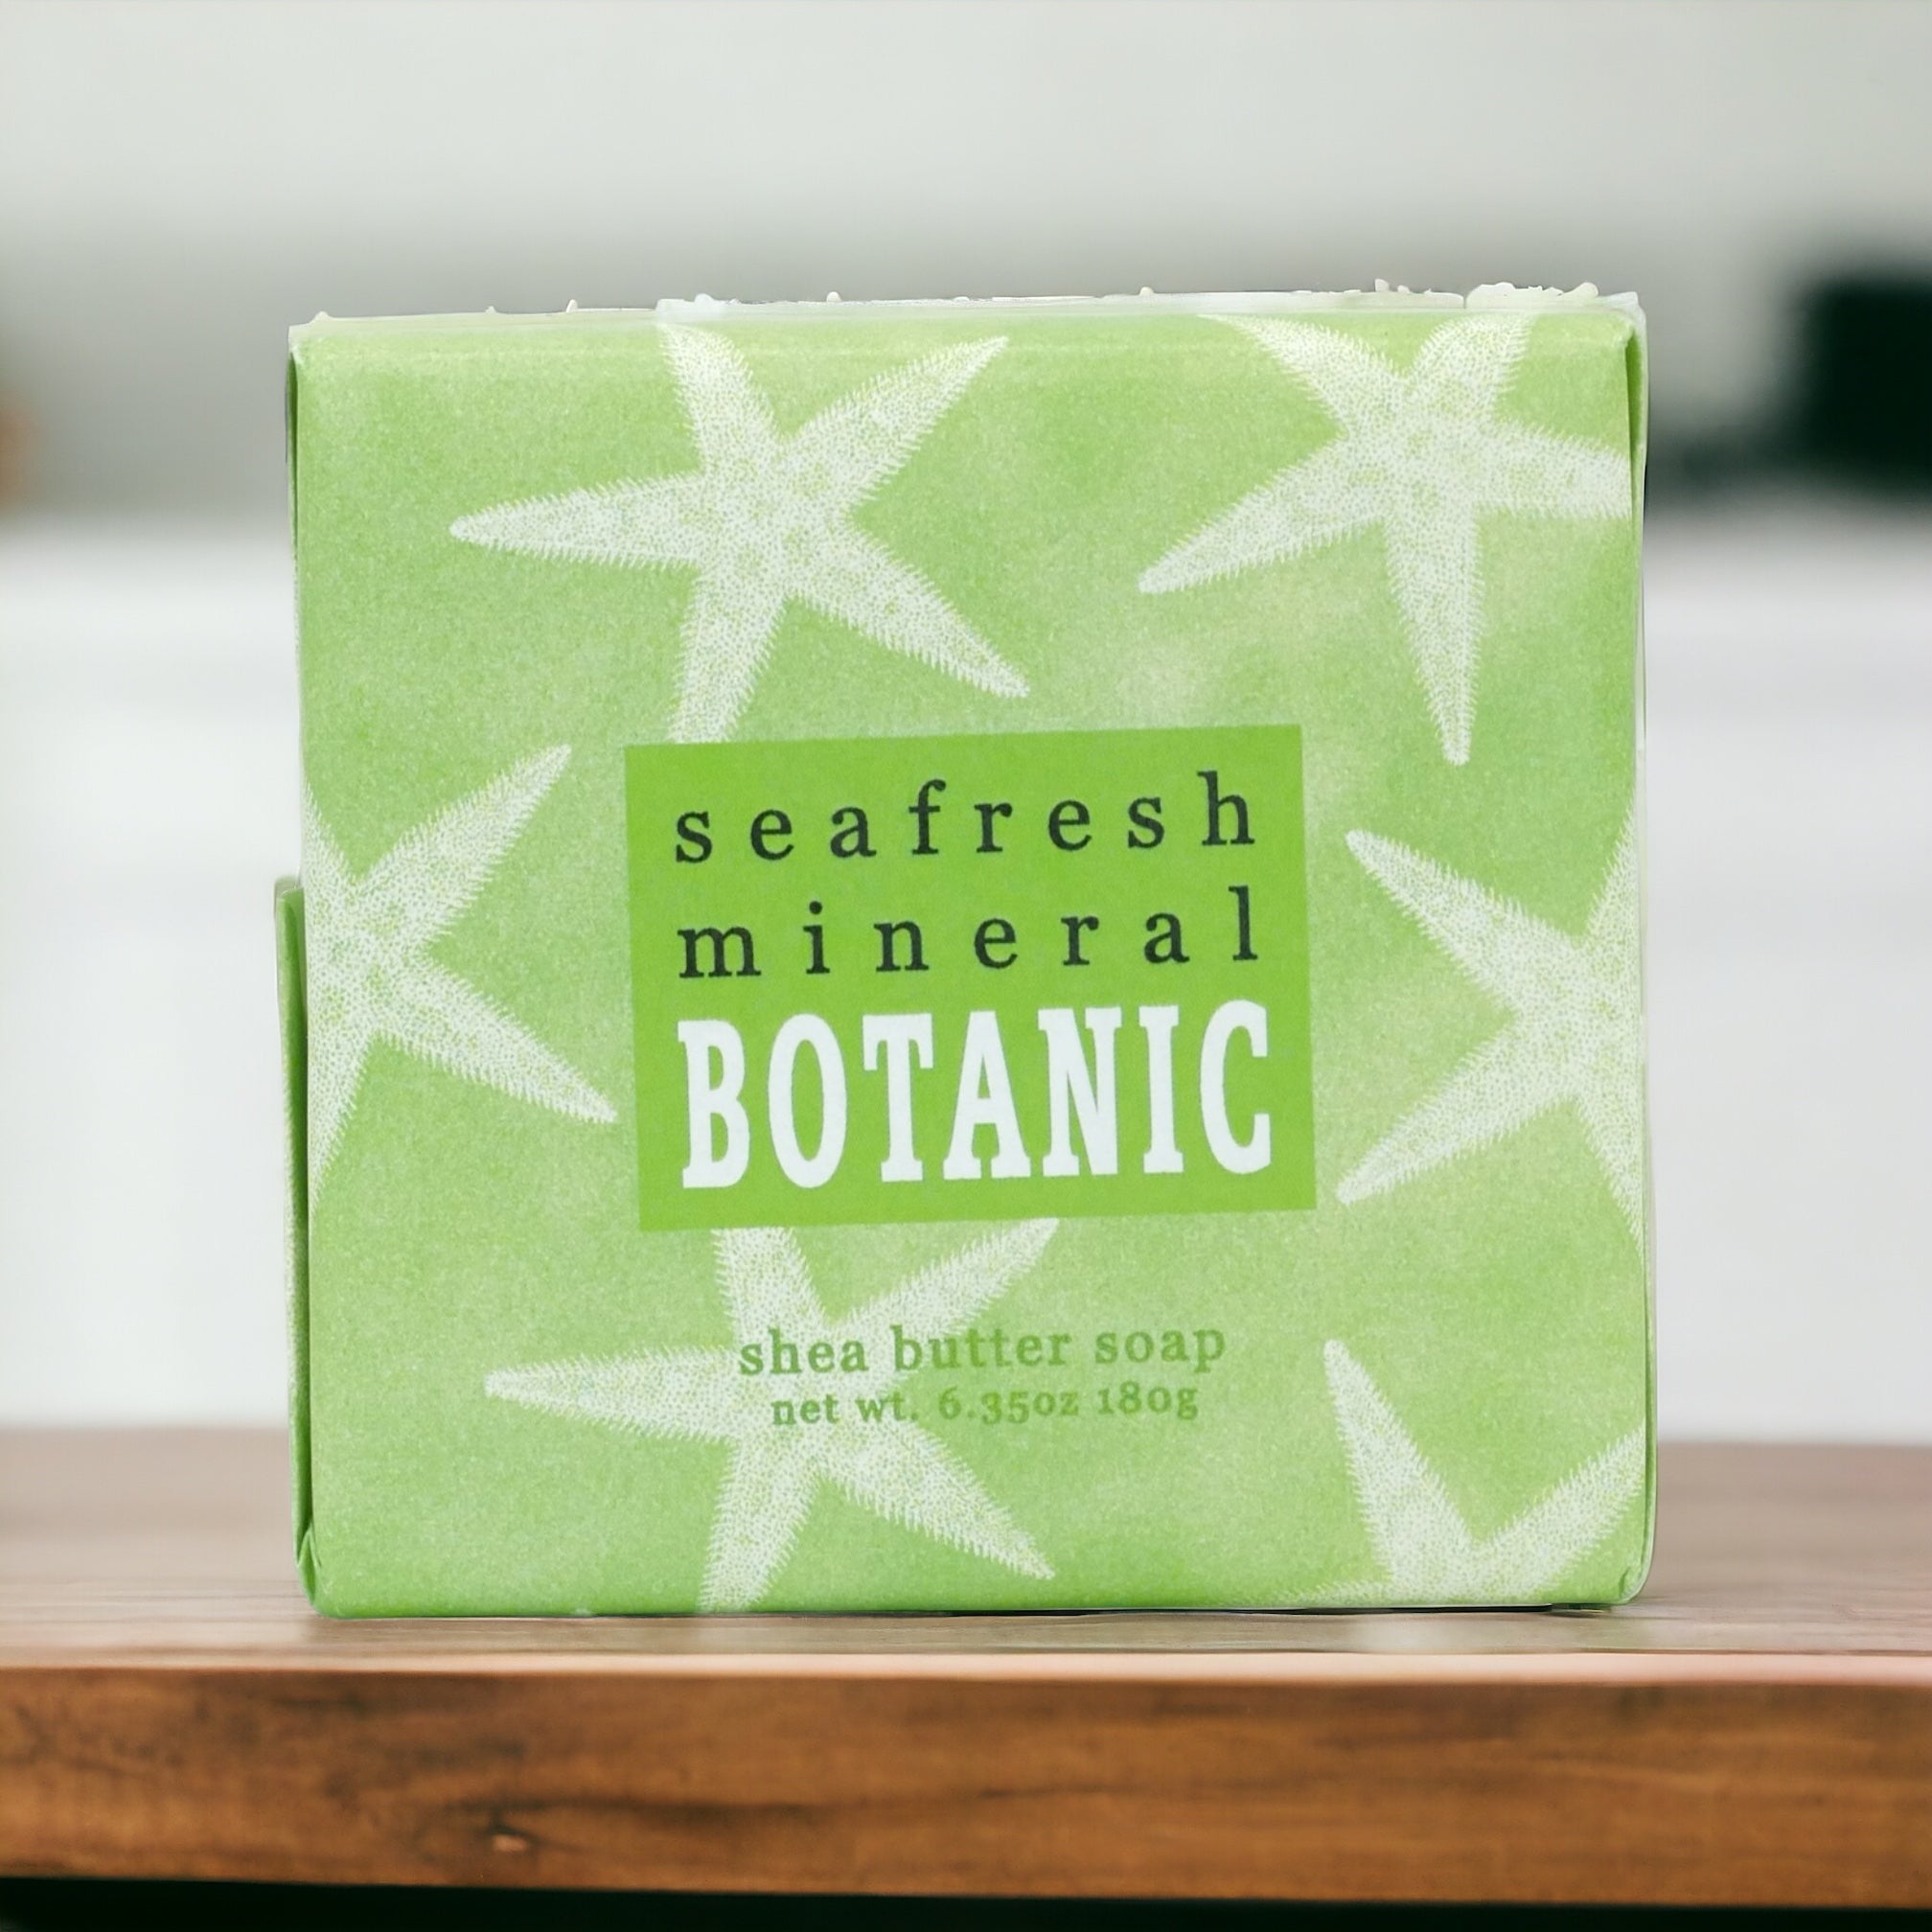 Seafresh Mineral Botanic Shea Butter Soap by Greenwich Bay Trading Co.